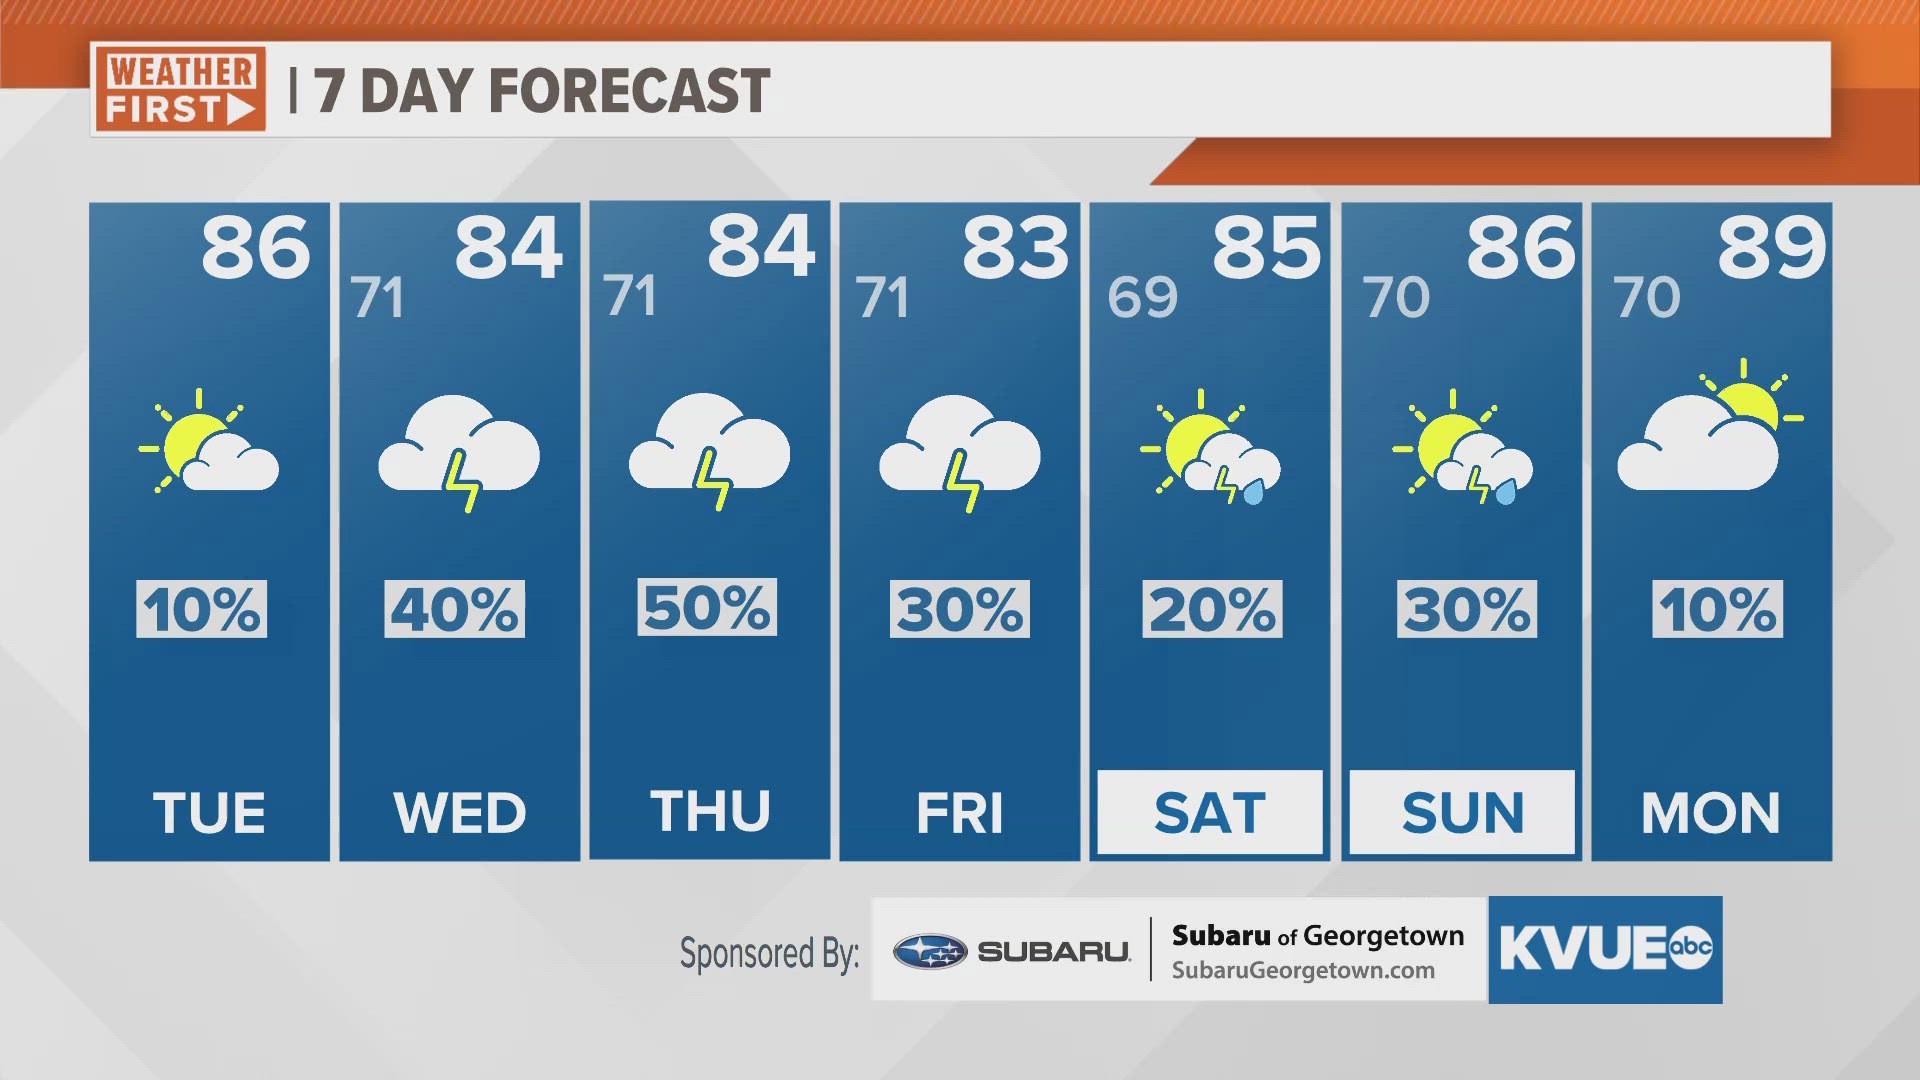 Warm and muggy Tuesday; rain chances on the rise for the rest of the week